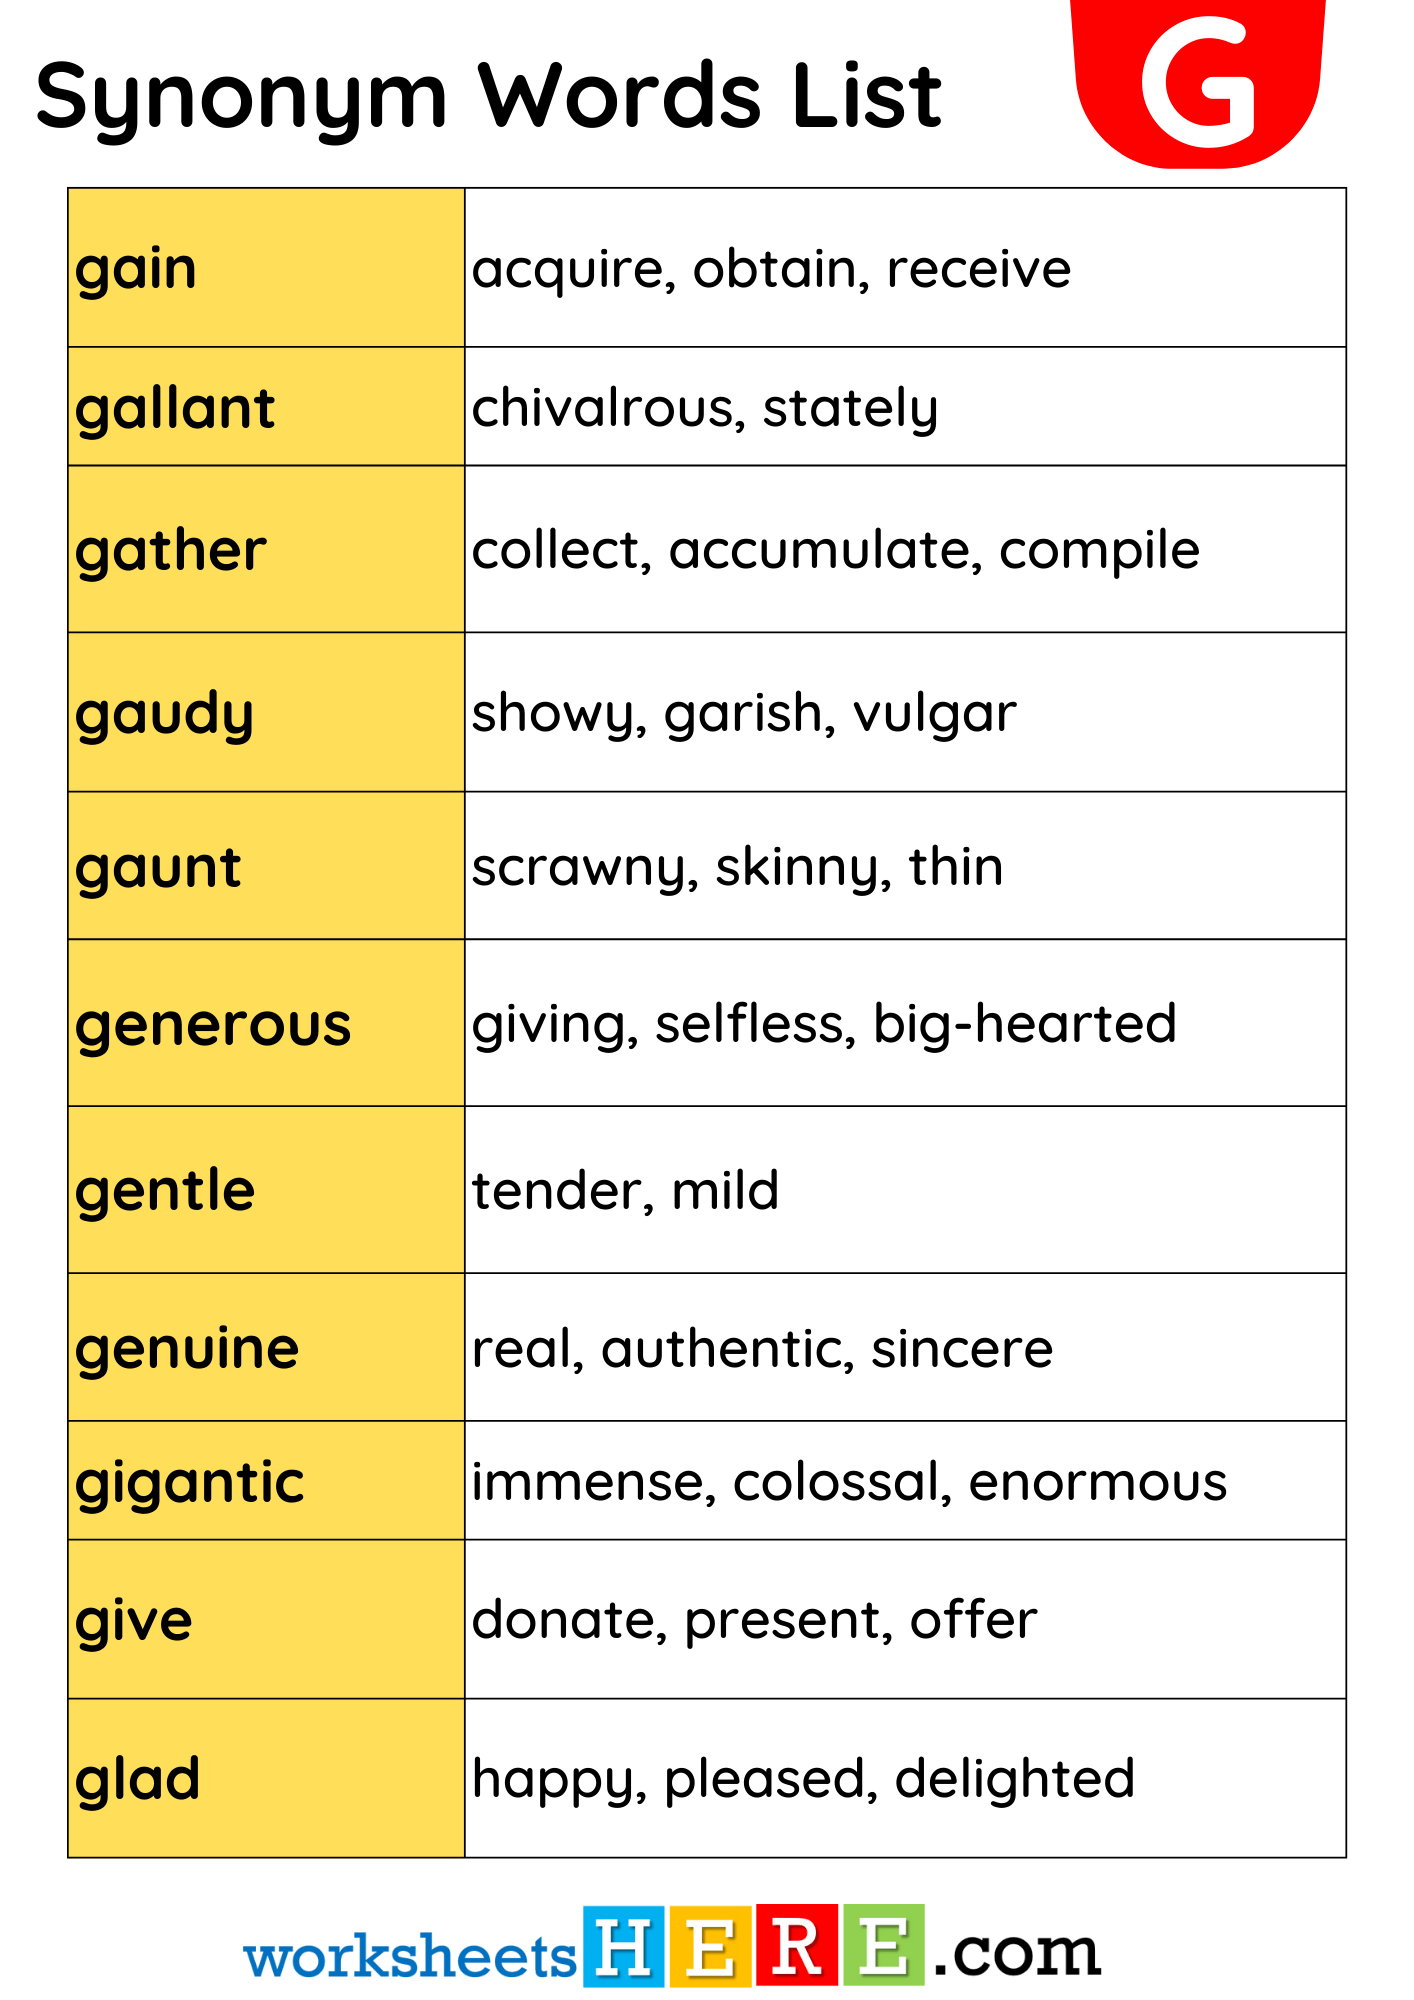 Synonym Words List Start with G Vocabulary PDF Worksheet For Students and Kids